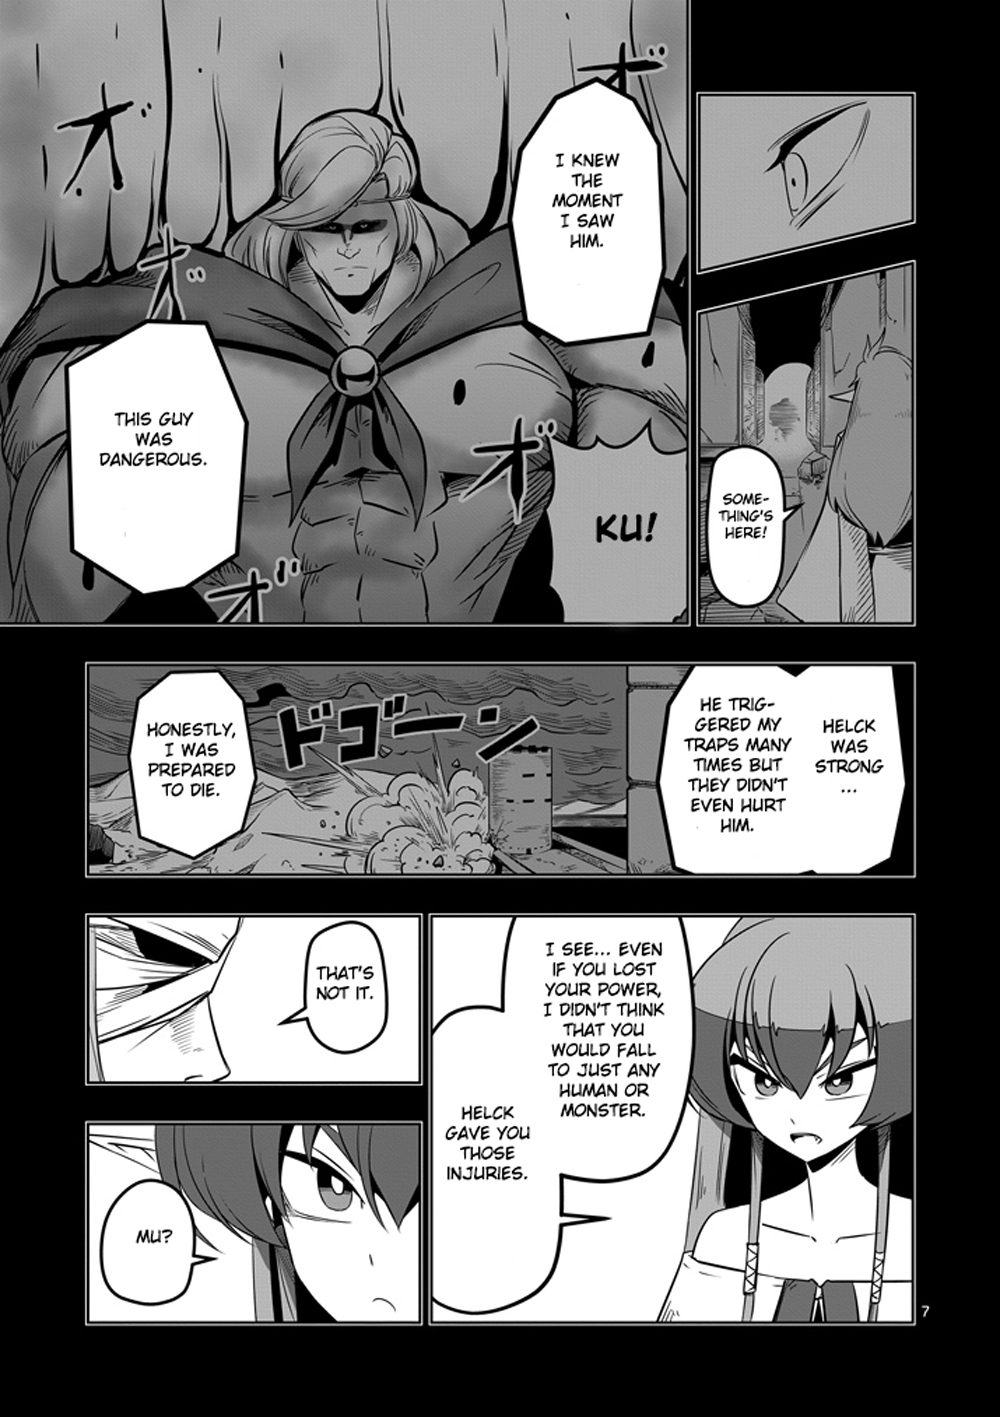 Helck Ch.9